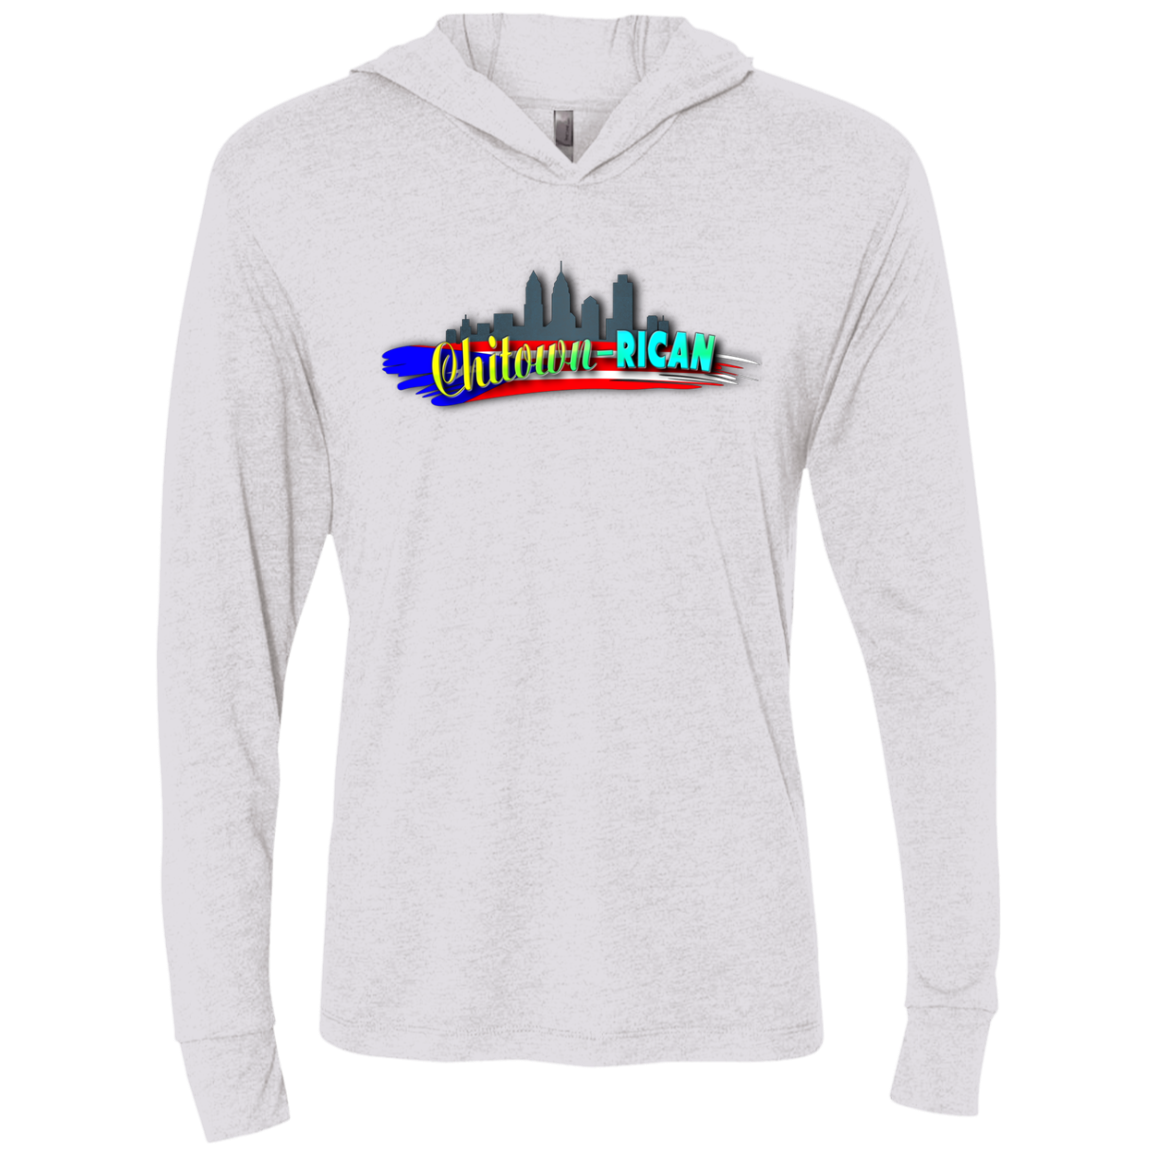 Chitown Rican Unisex Triblend LS Hooded T-Shirt - Puerto Rican Pride